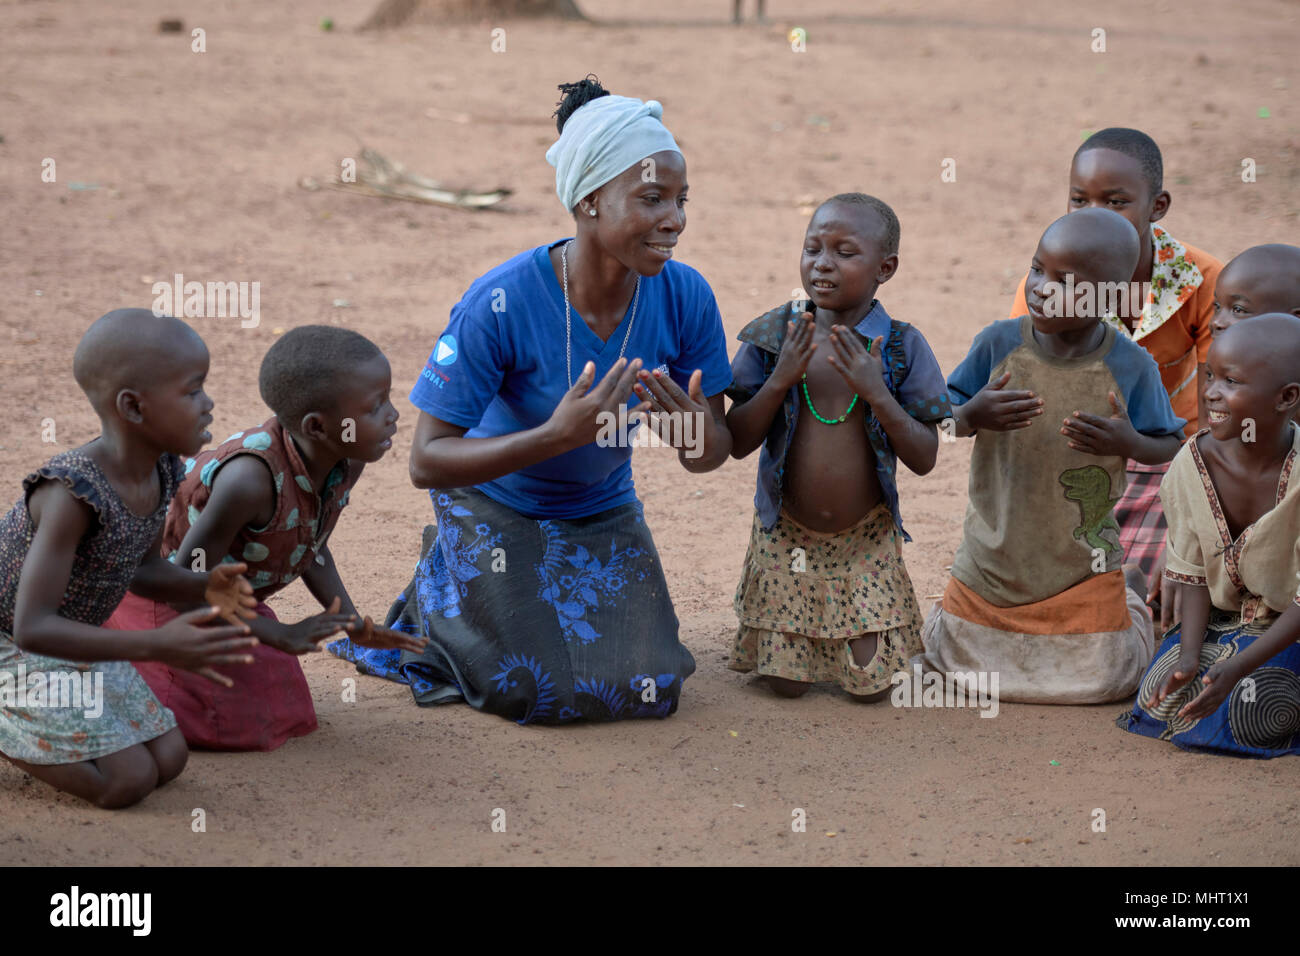 A YWCA educator plays games with children displaced by armed conflict in South Sudan. Stock Photo